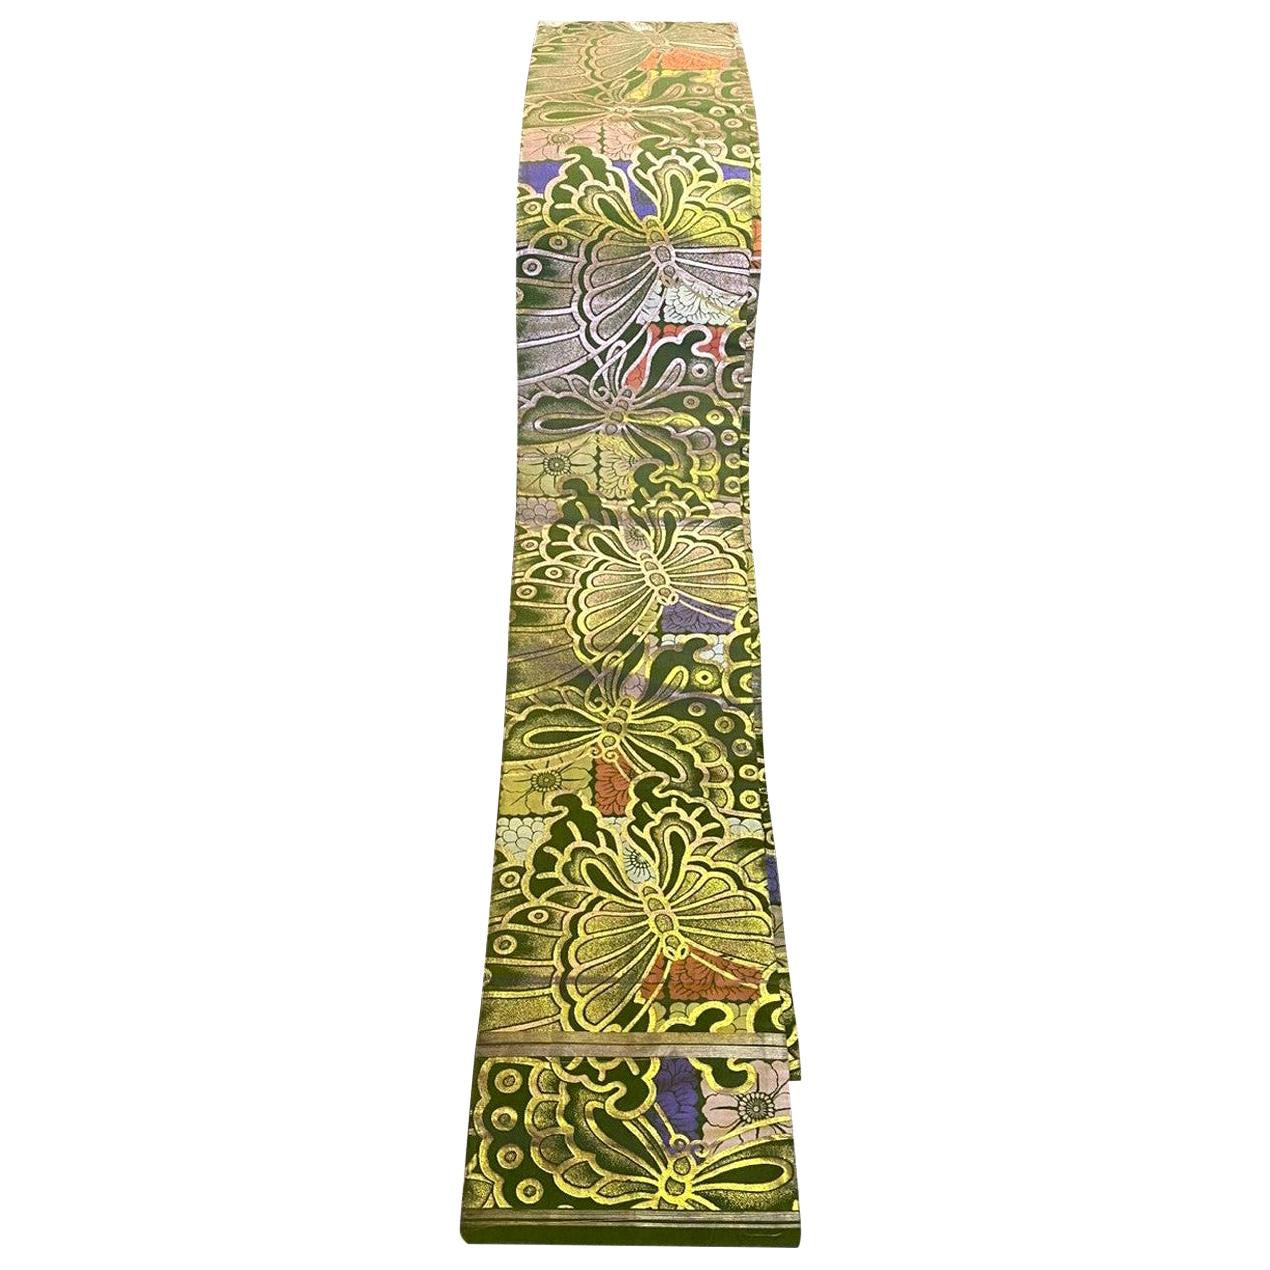 Japanese Silk Obi Sash Belt with Colorful Butterfly Nature Motif, Mid-1900s